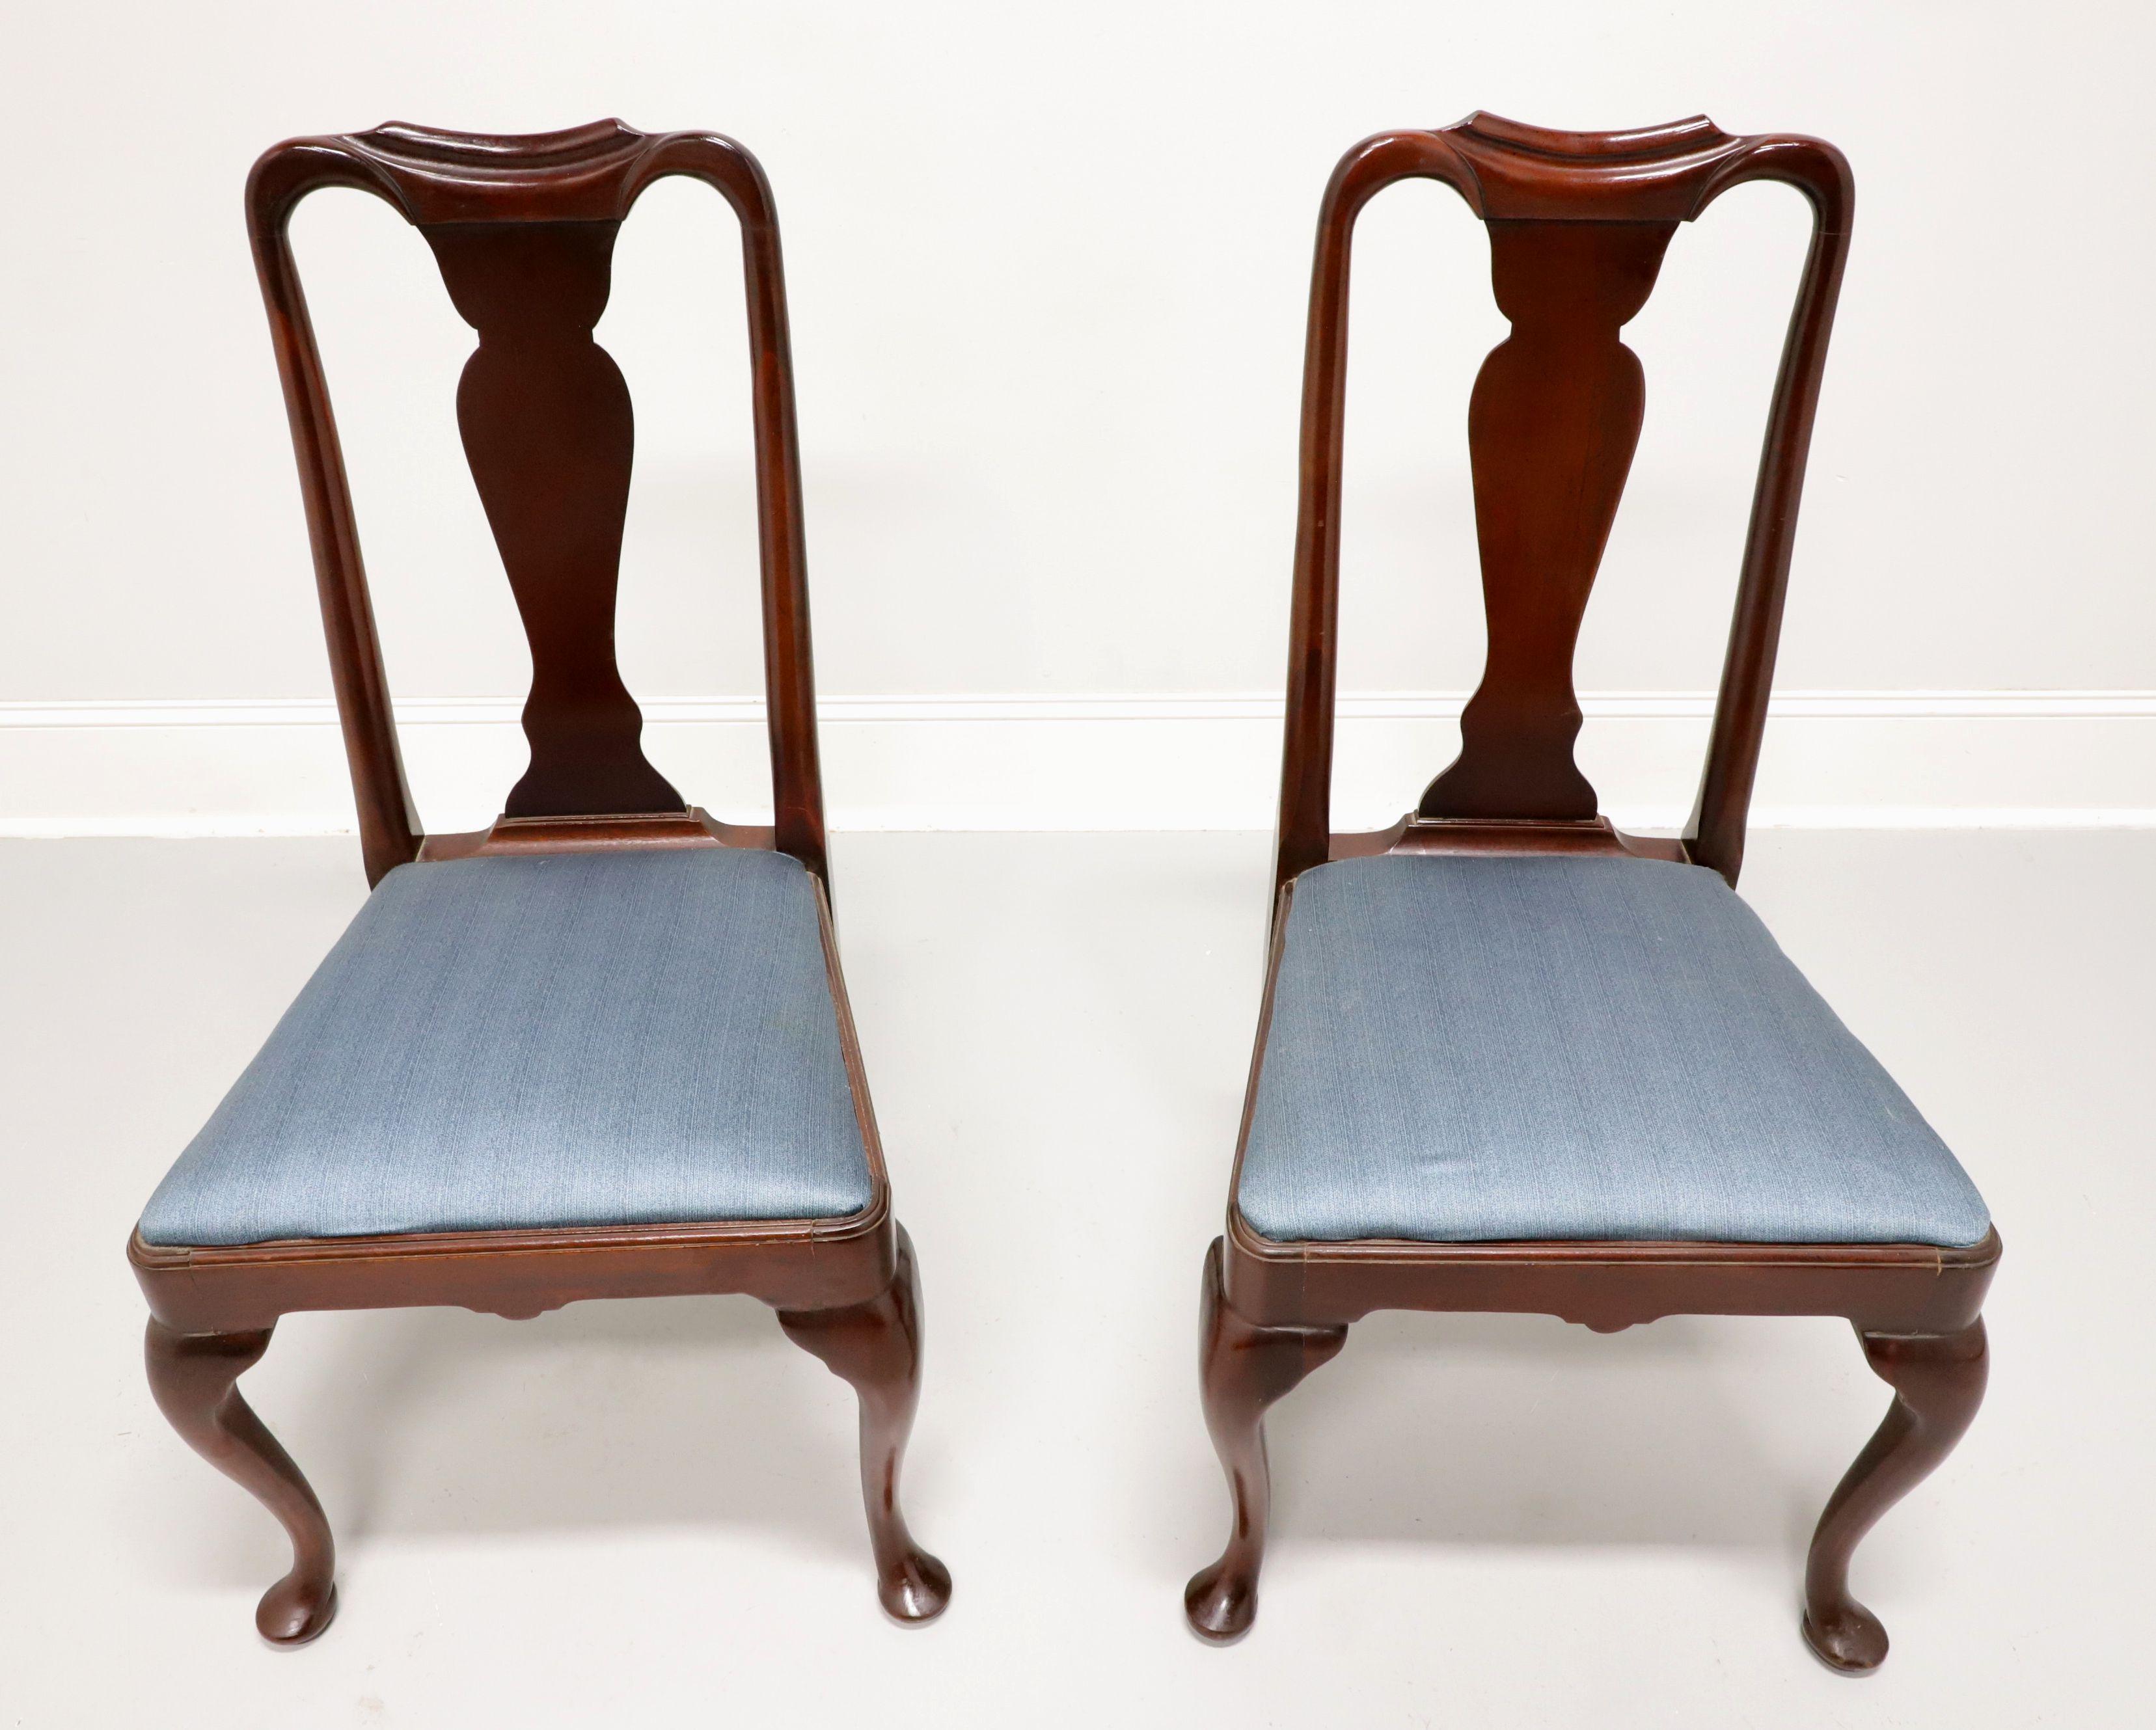 A pair of dining side chairs in the Queen Anne style by Hickory Chair. Solid mahogany with solid carved back, a blue color fabric upholstered seat, cabriole legs and pad feet. Made in North Carolina, USA, in the late 20th century.

Measures: